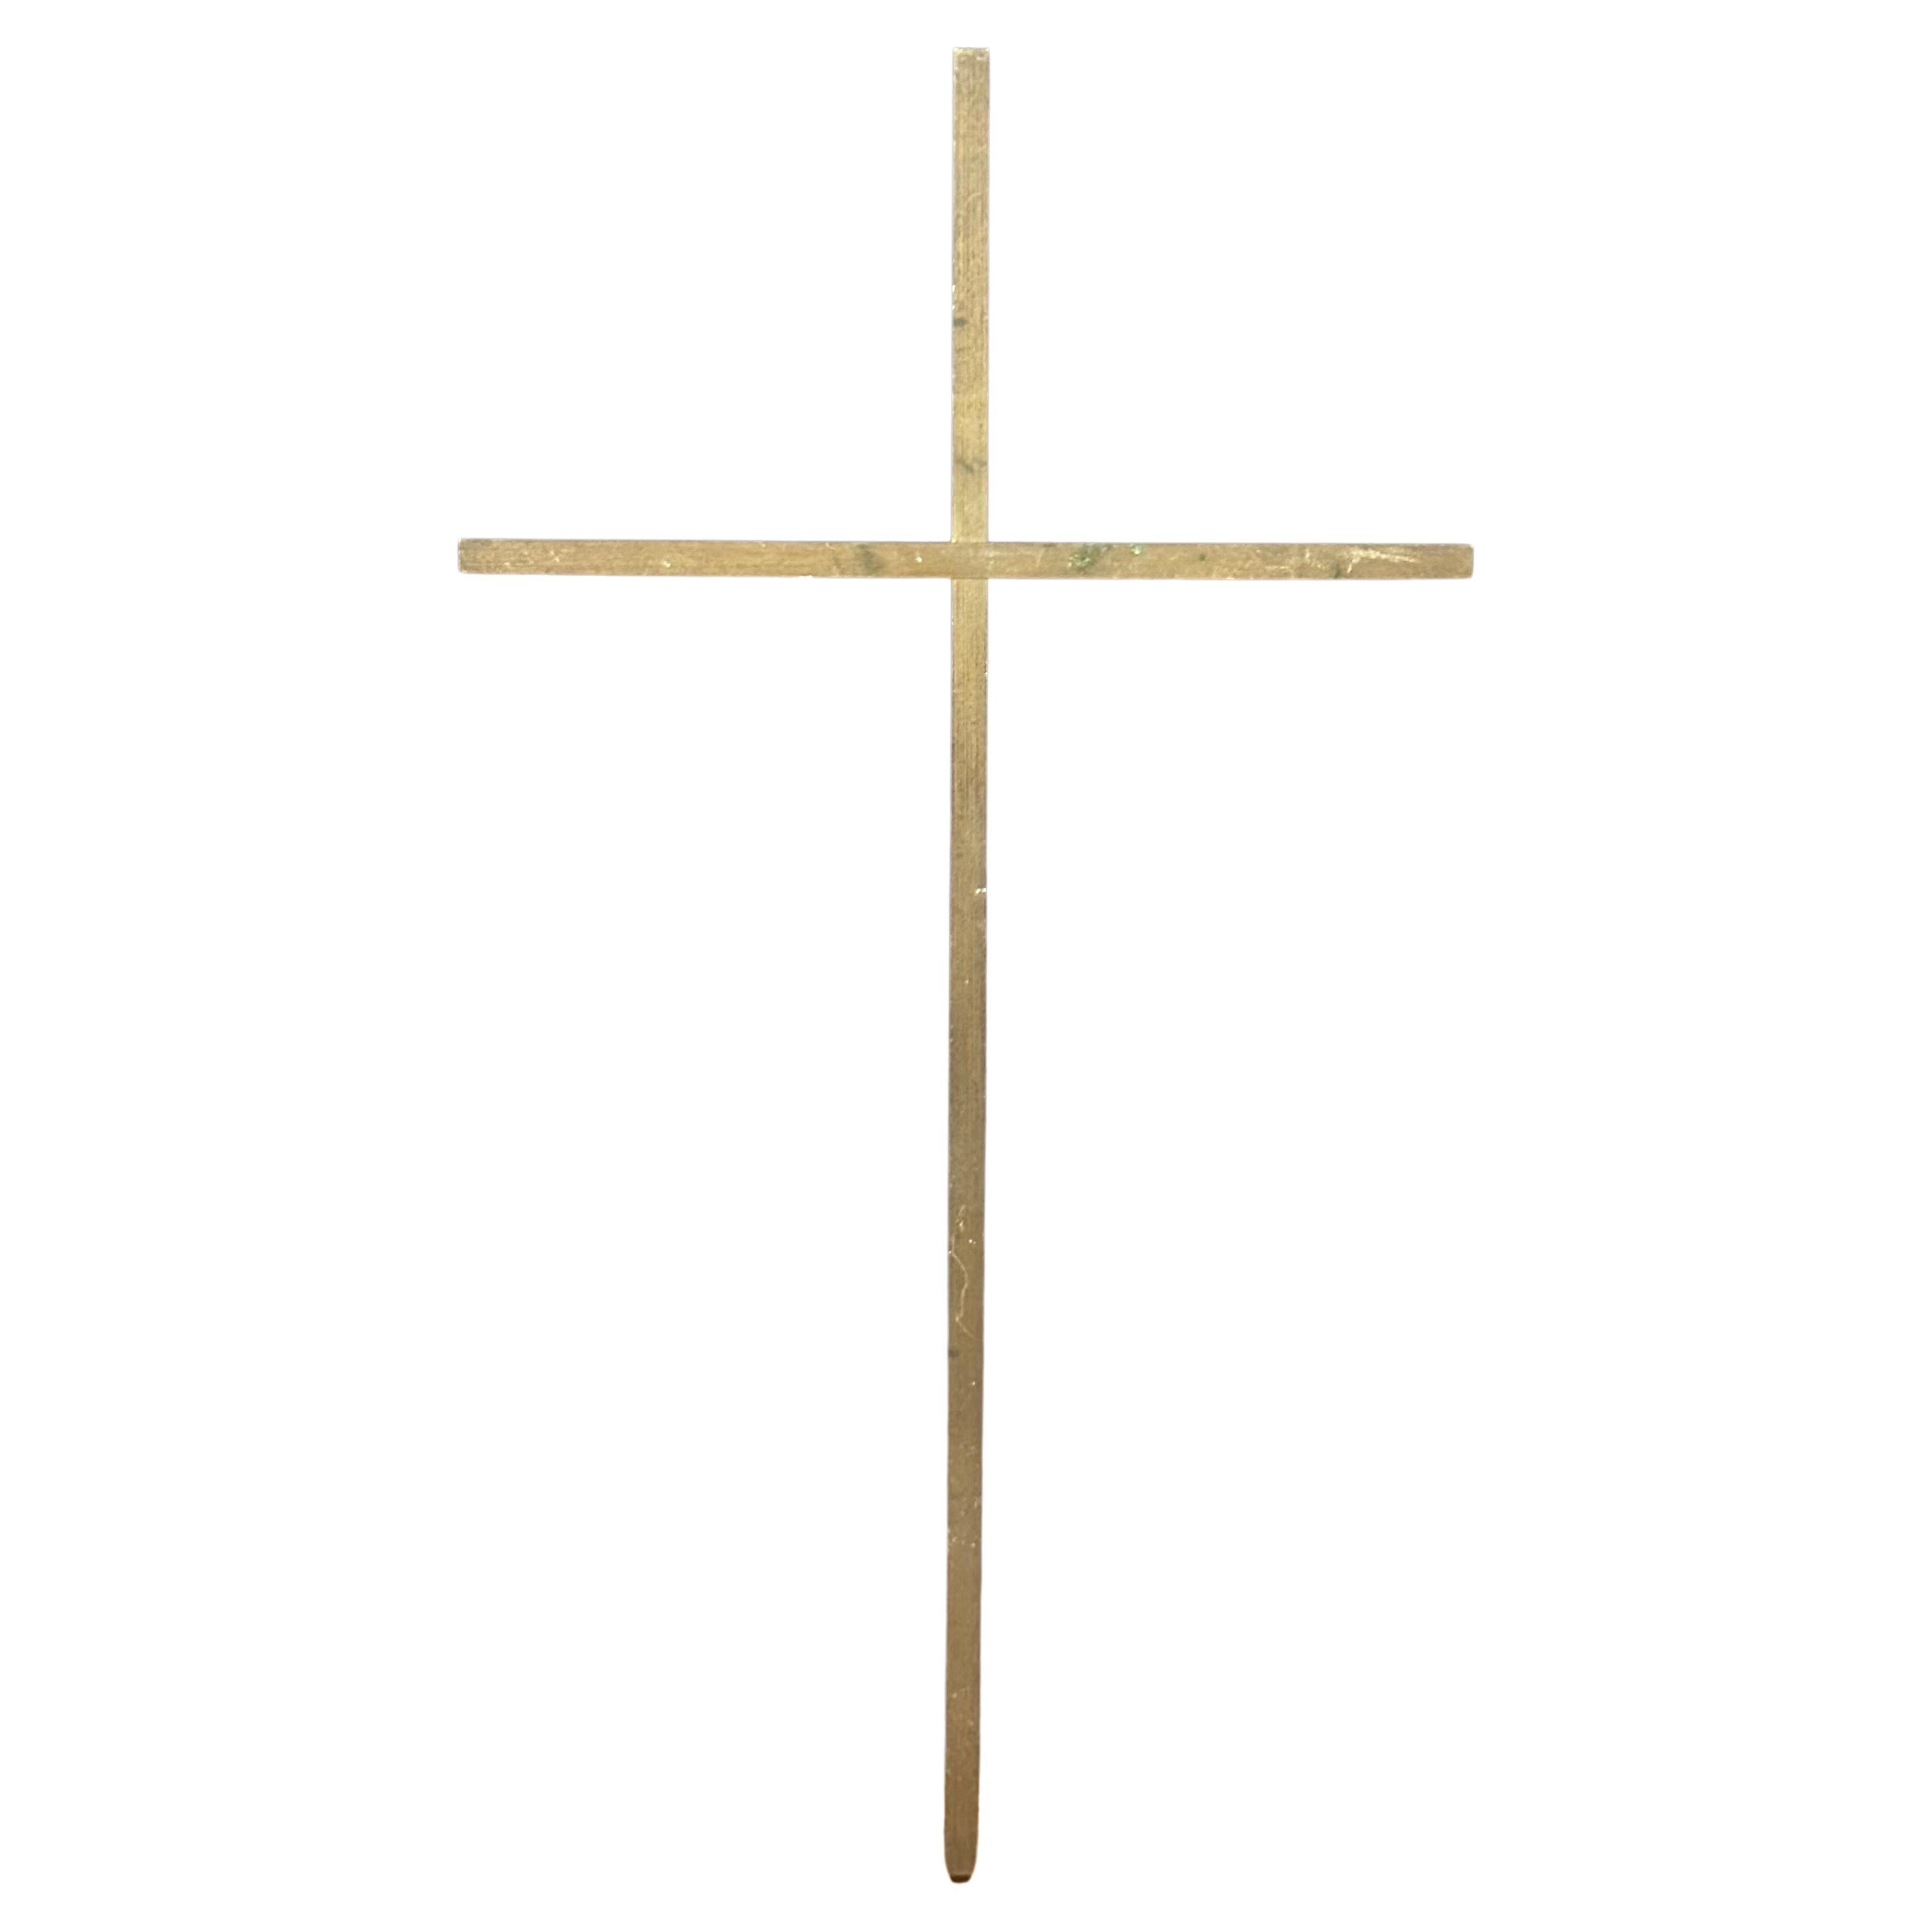 Large minimalist MCM brass cross, circa 1960s. The piece is in very good vintage condition and measures 12.25